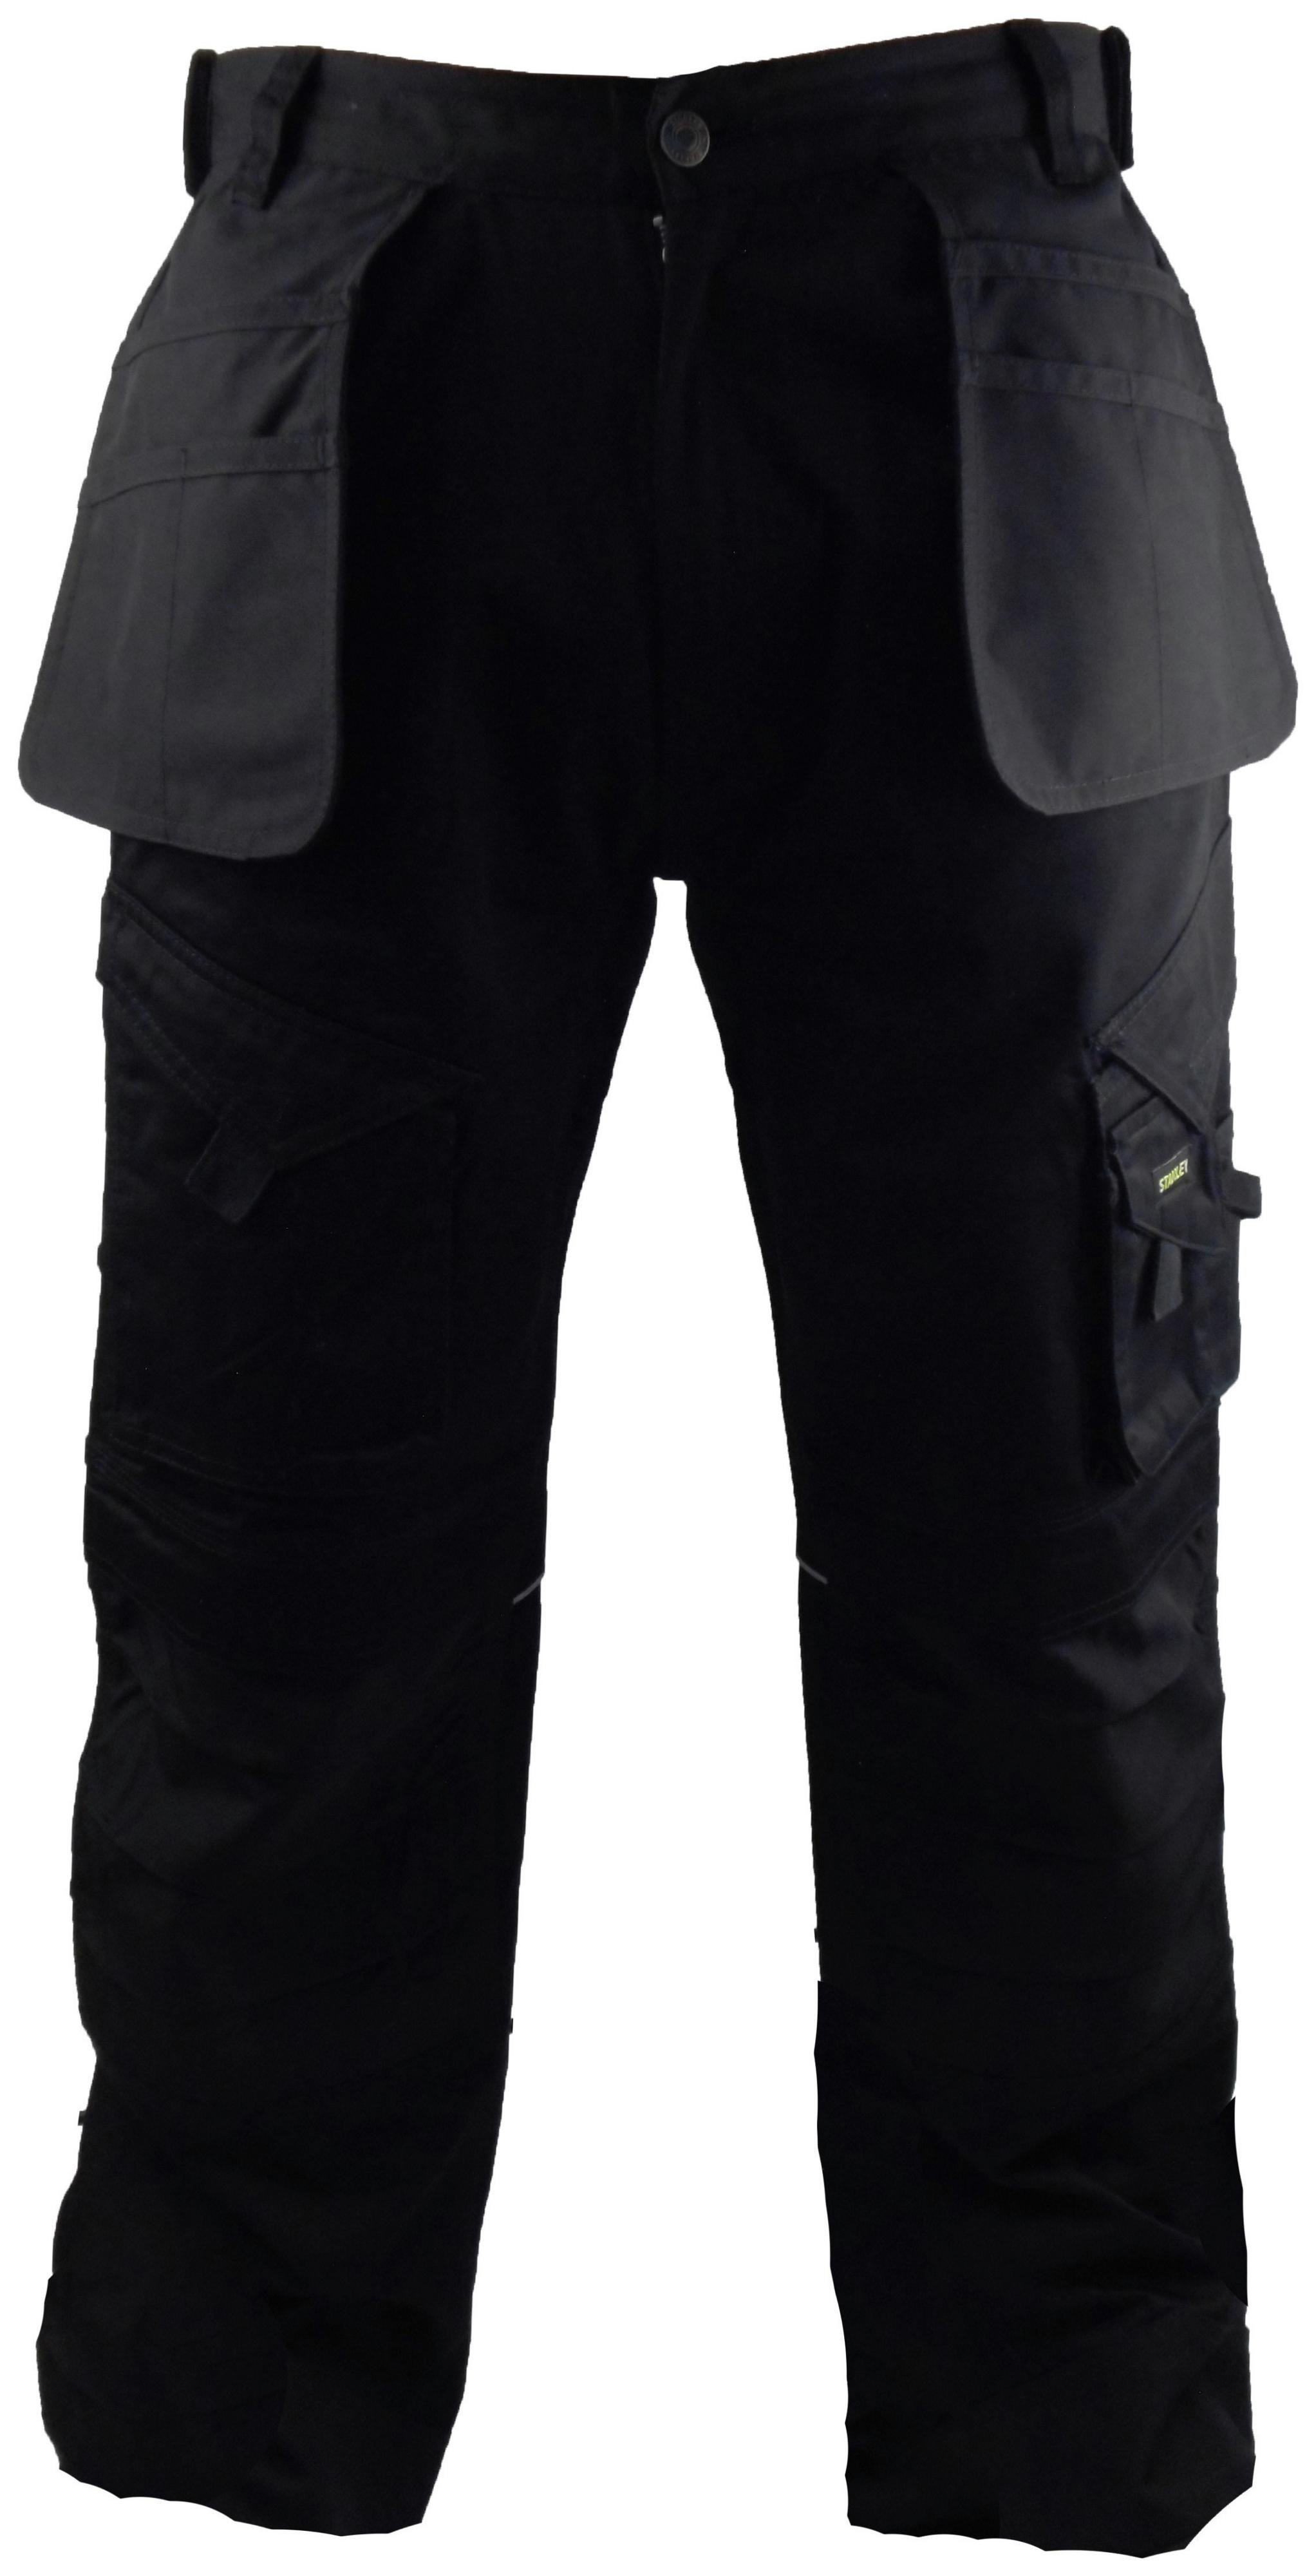 Stanley Colorado Men's Black Trouser - 31 to 40 inch. Review